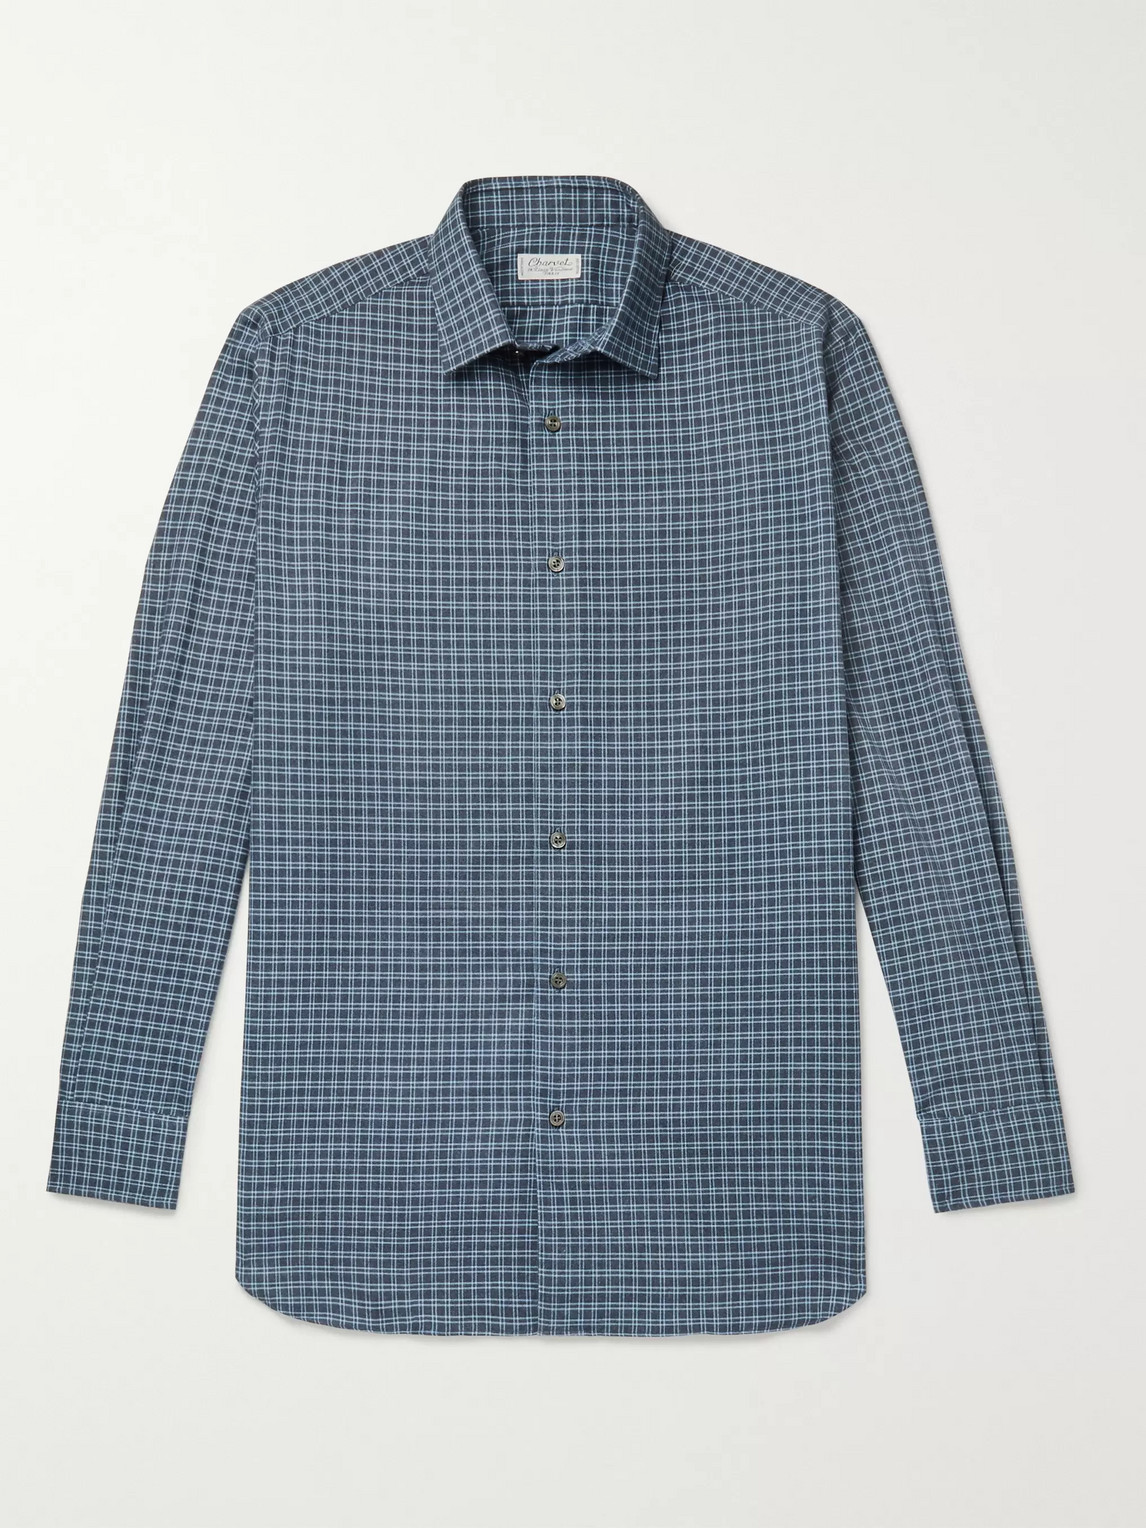 Charvet Checked Cotton Shirt In Blue